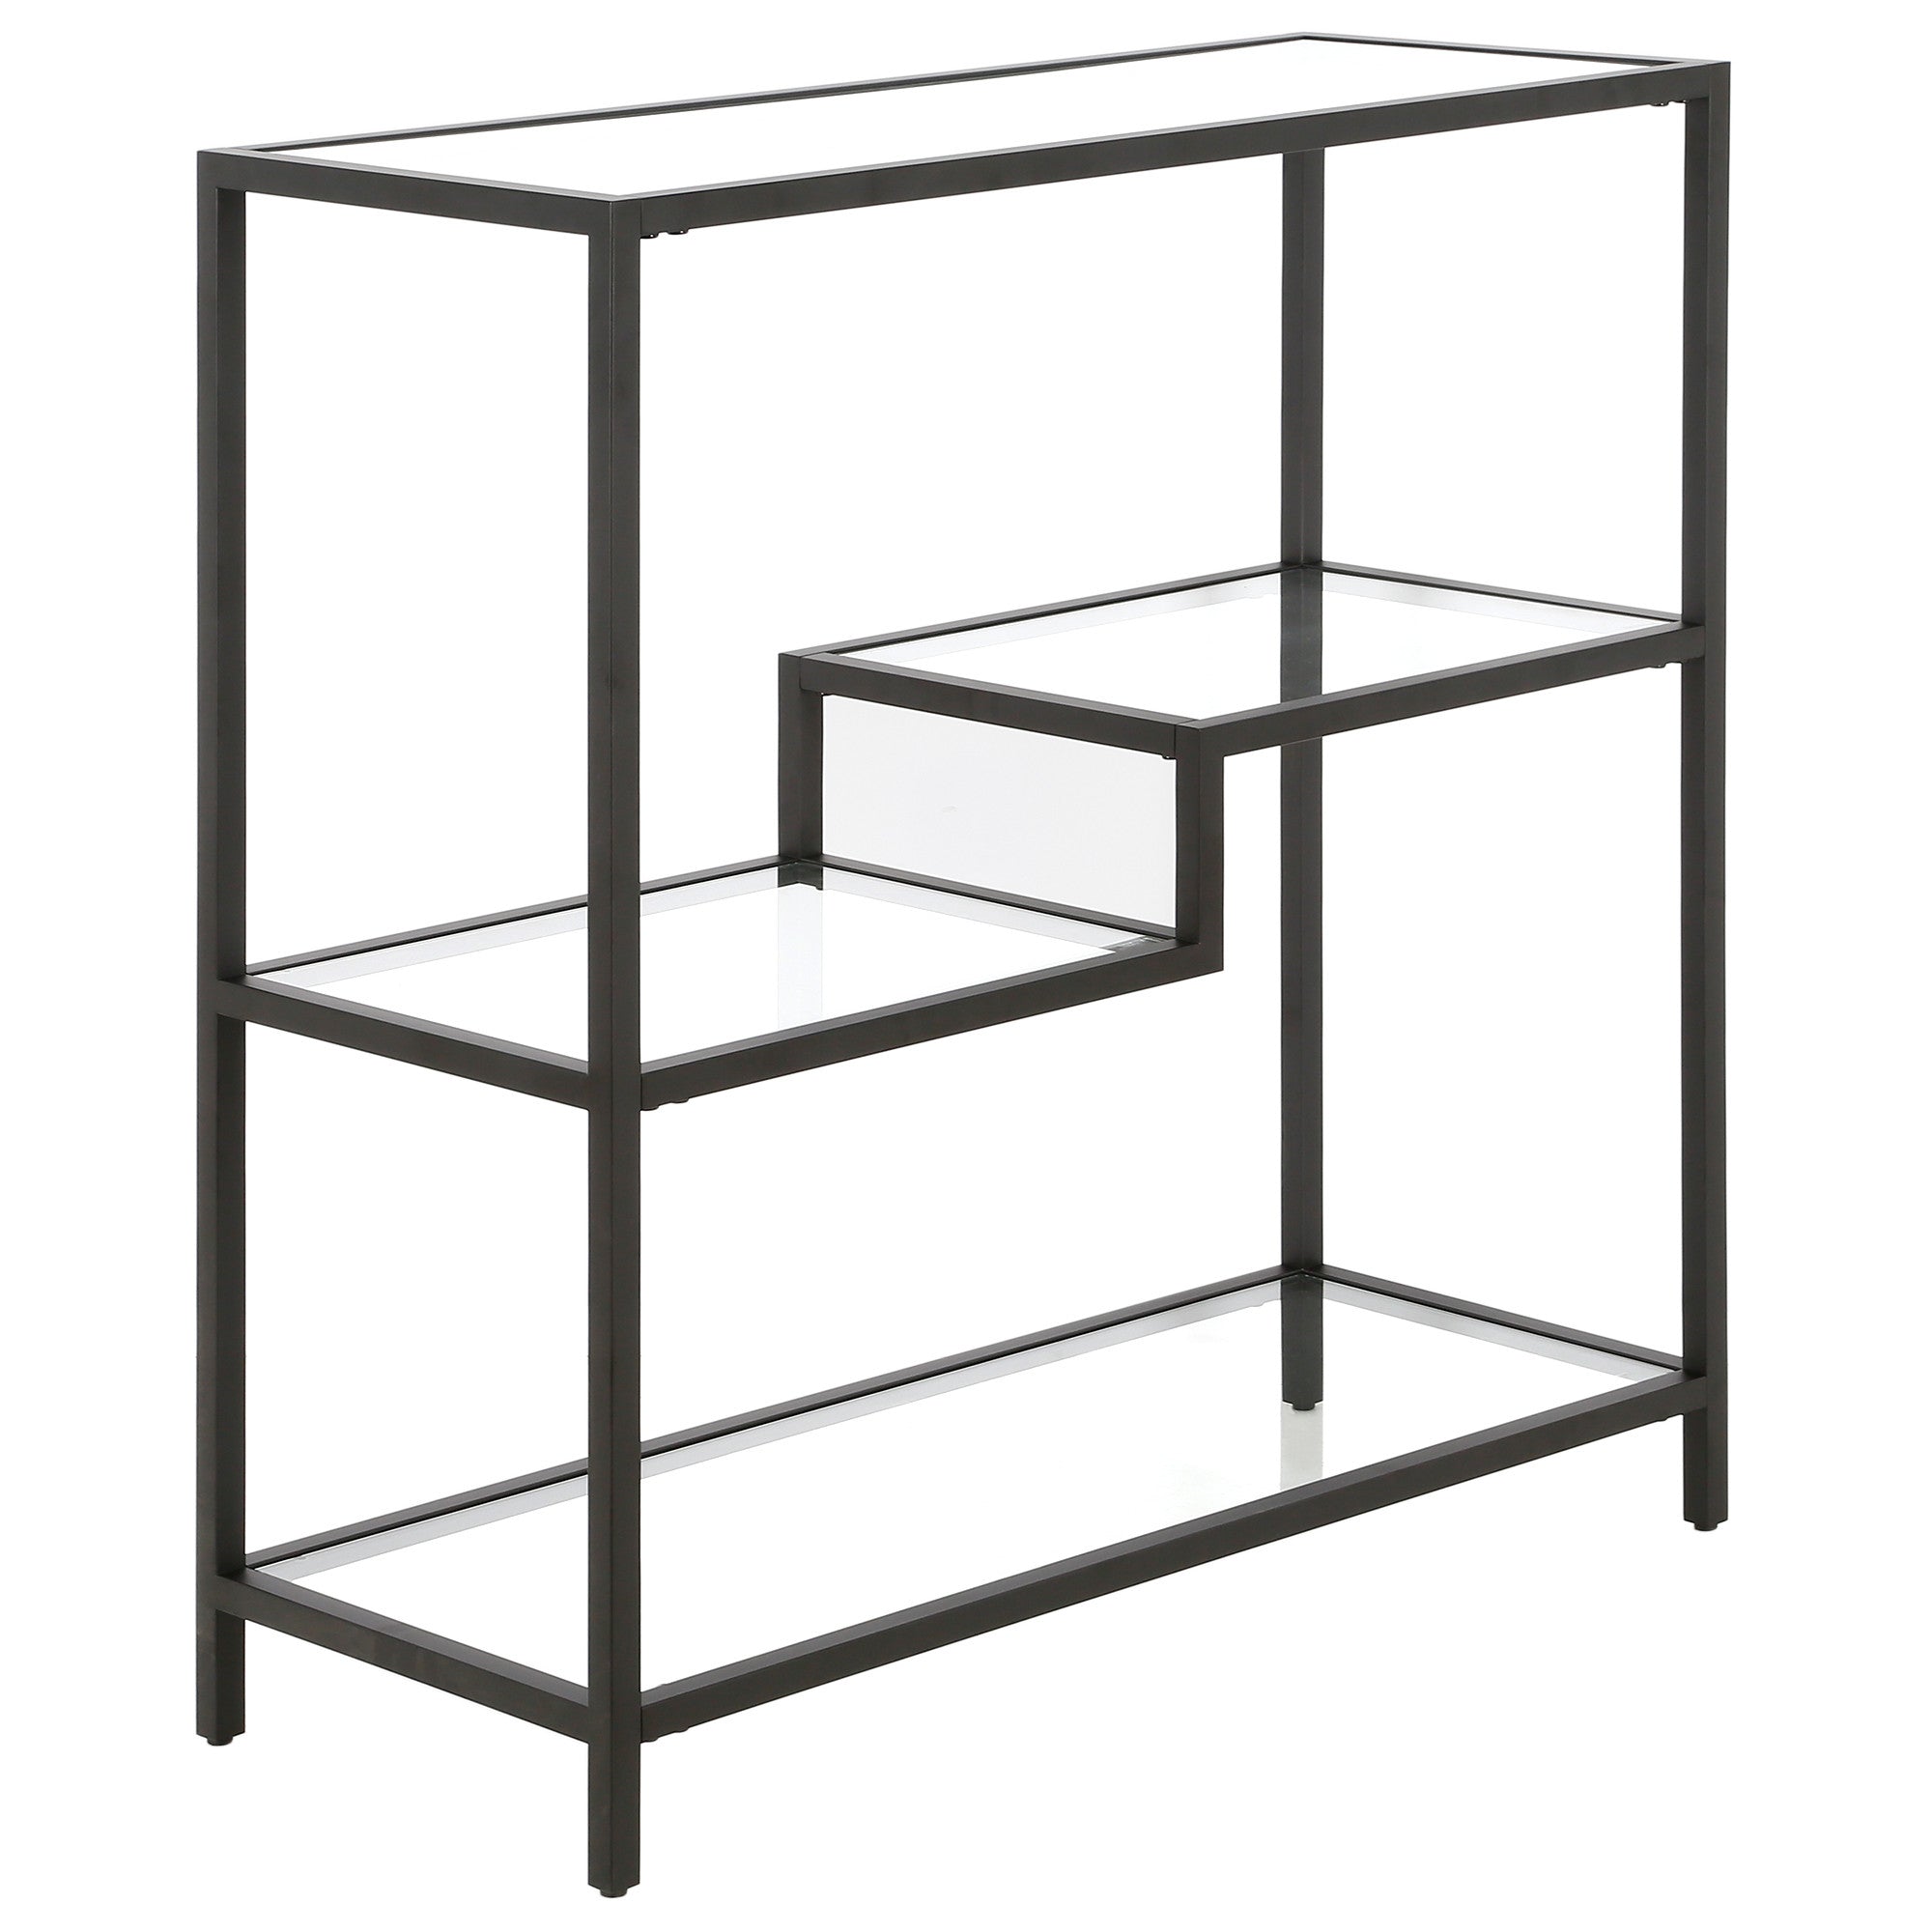 36" Black Metal And Glass Four Tier Etagere Bookcase